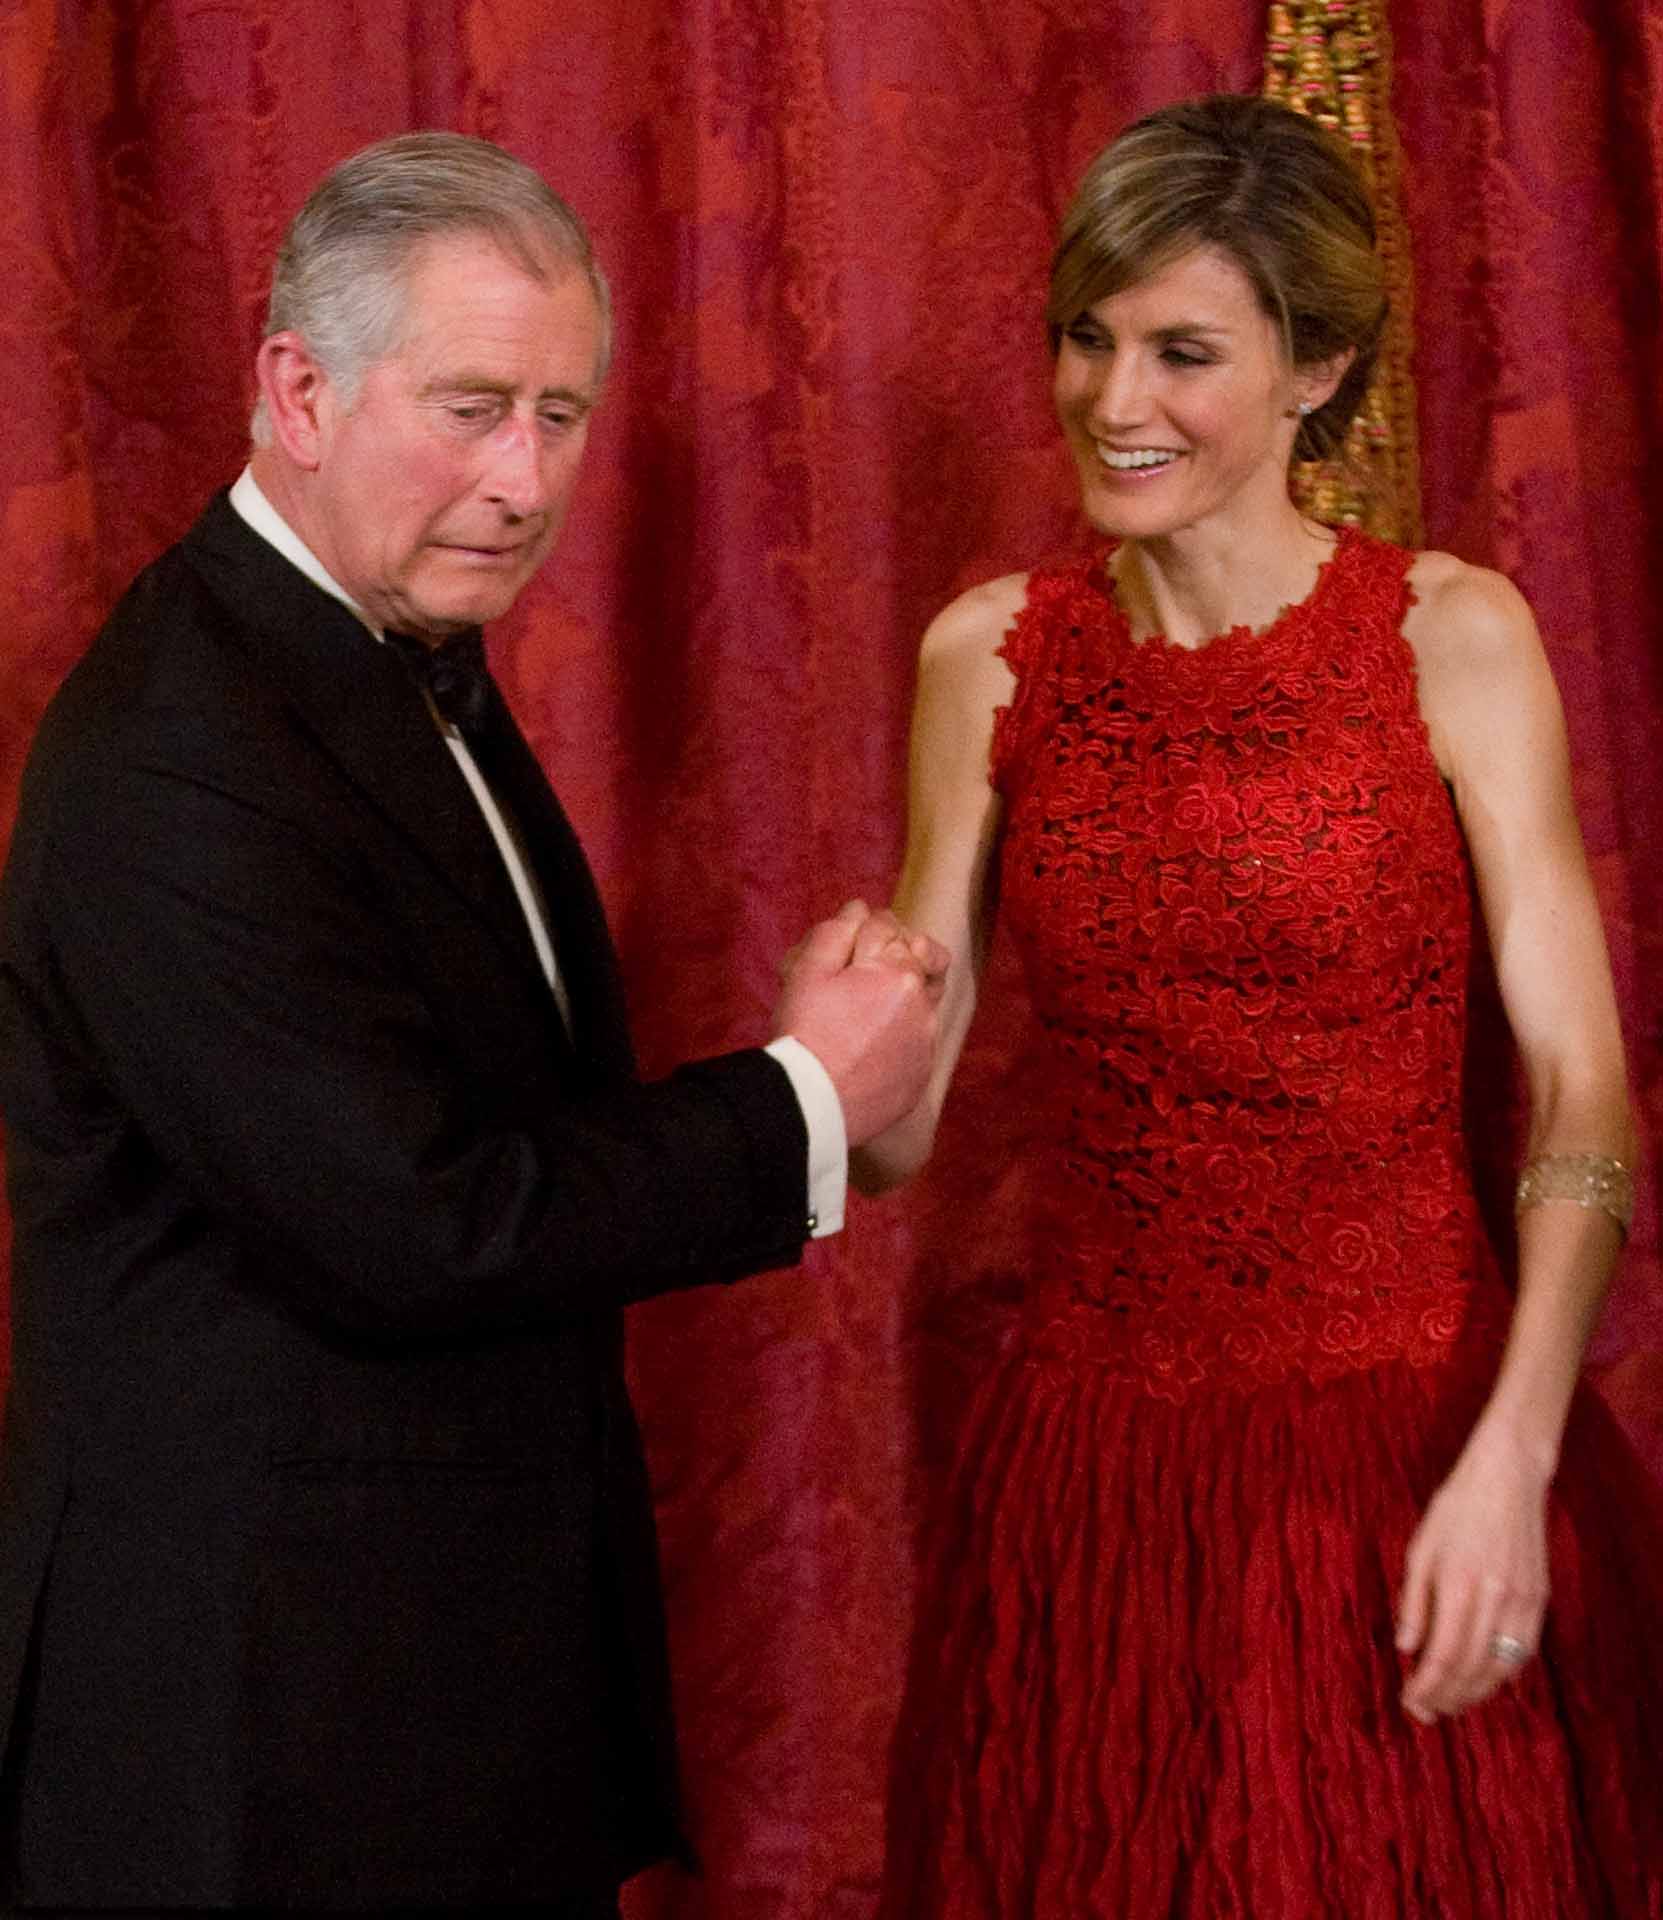 Letizia, Princess of Asturias greets Prince Charles, Prince of Wales attend the official welcome dinner given at the Royal Palace of Madrid